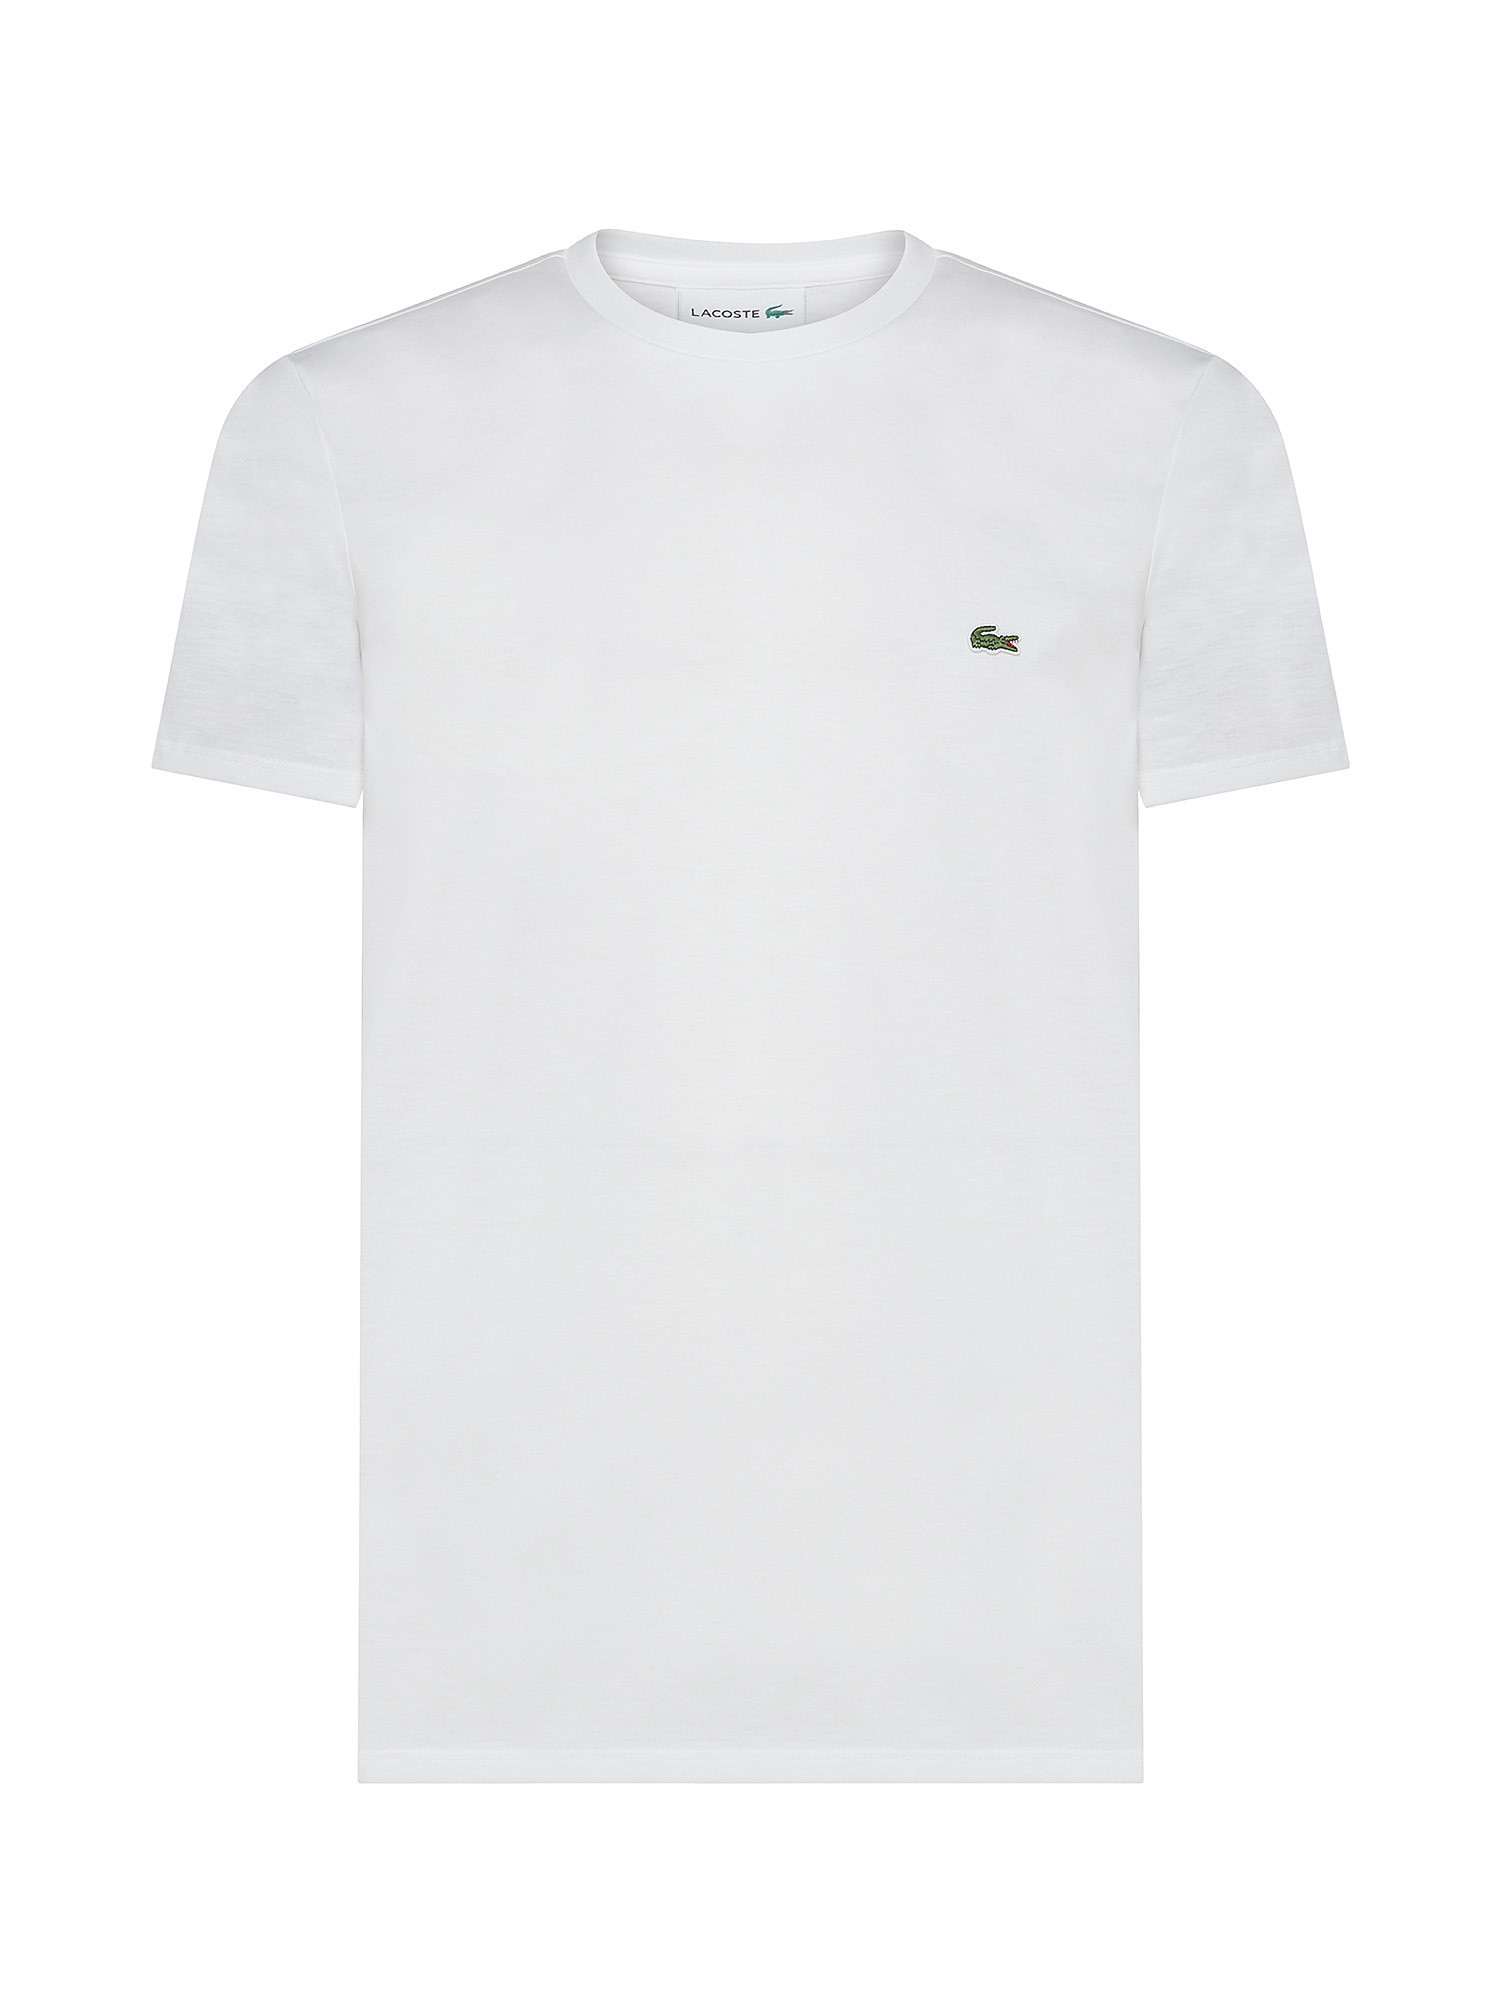 Lacoste - T-shirt girocollo in jersey di cotone Pima, Bianco, large image number 0